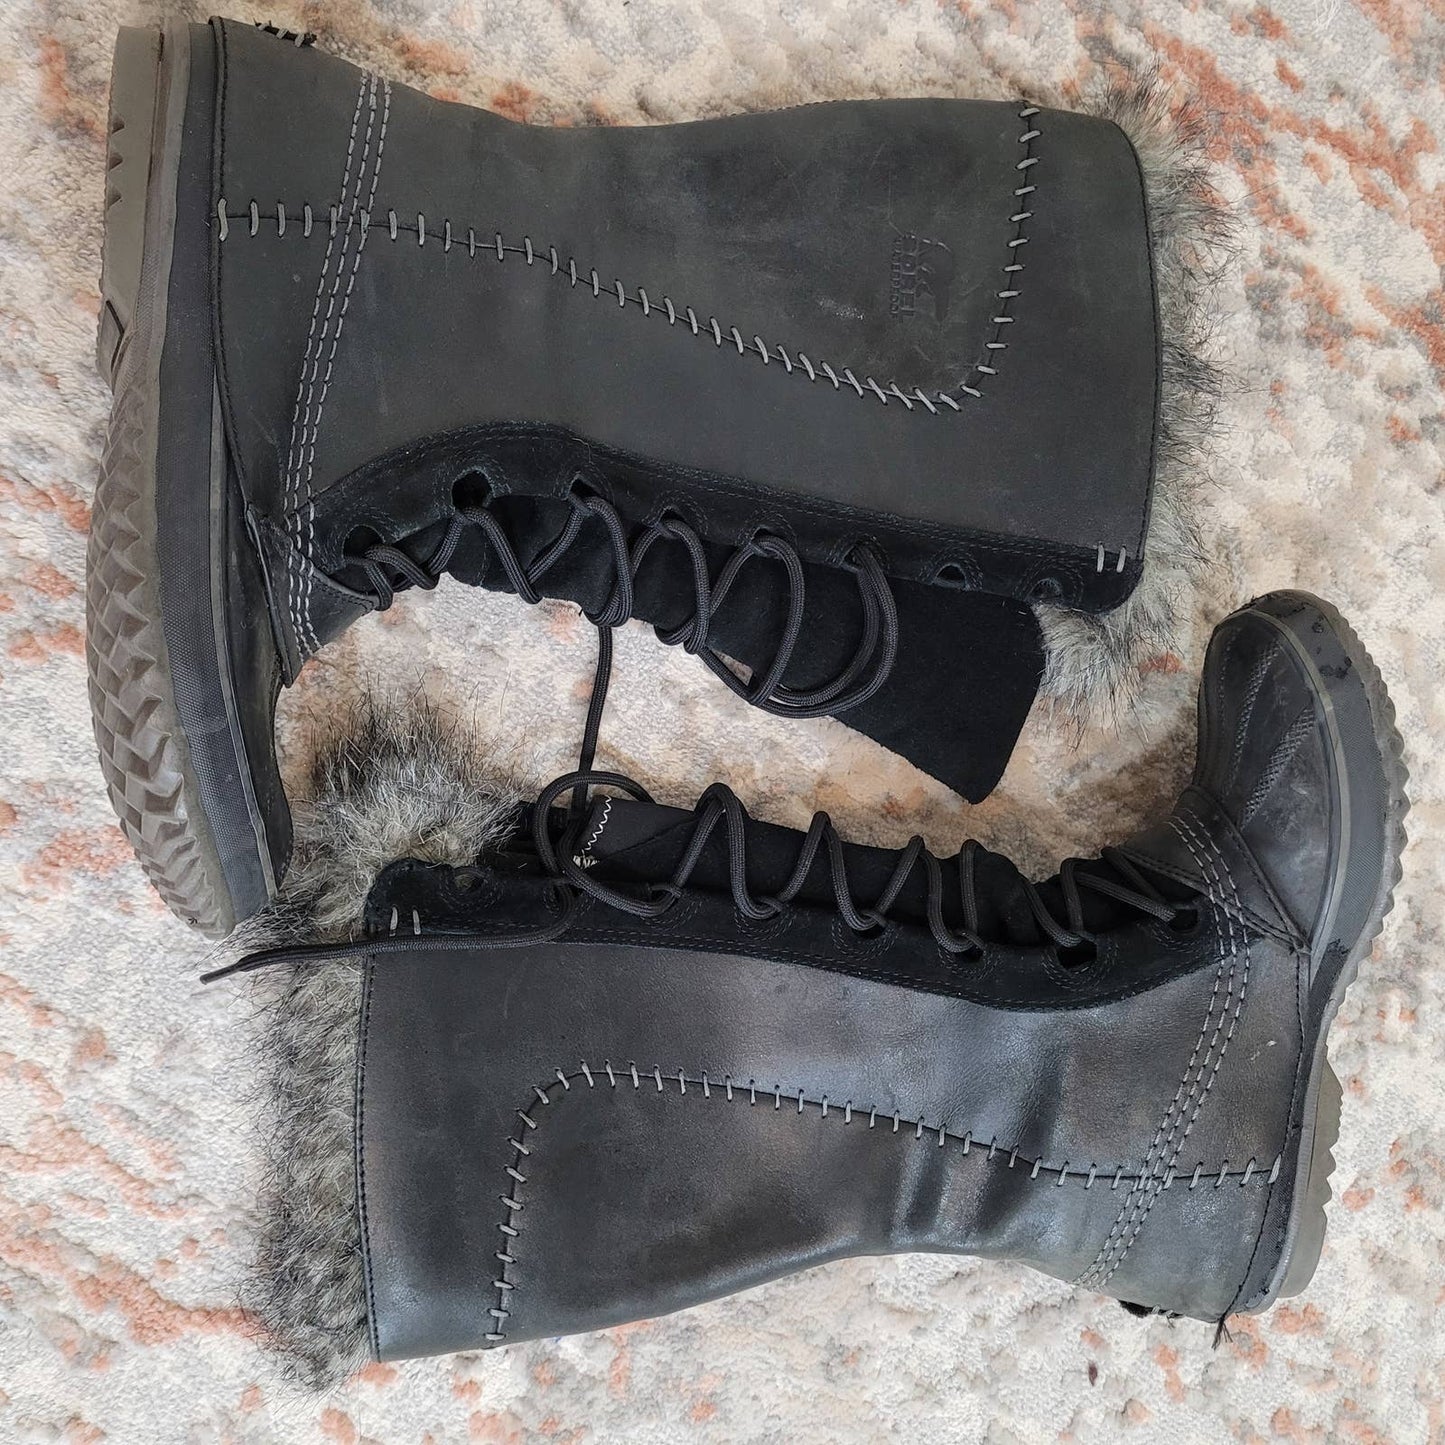 Sorel Cate the Great Black Leather Winter Boots with Faux Fur Trim - Size 8Markita's ClosetSorel